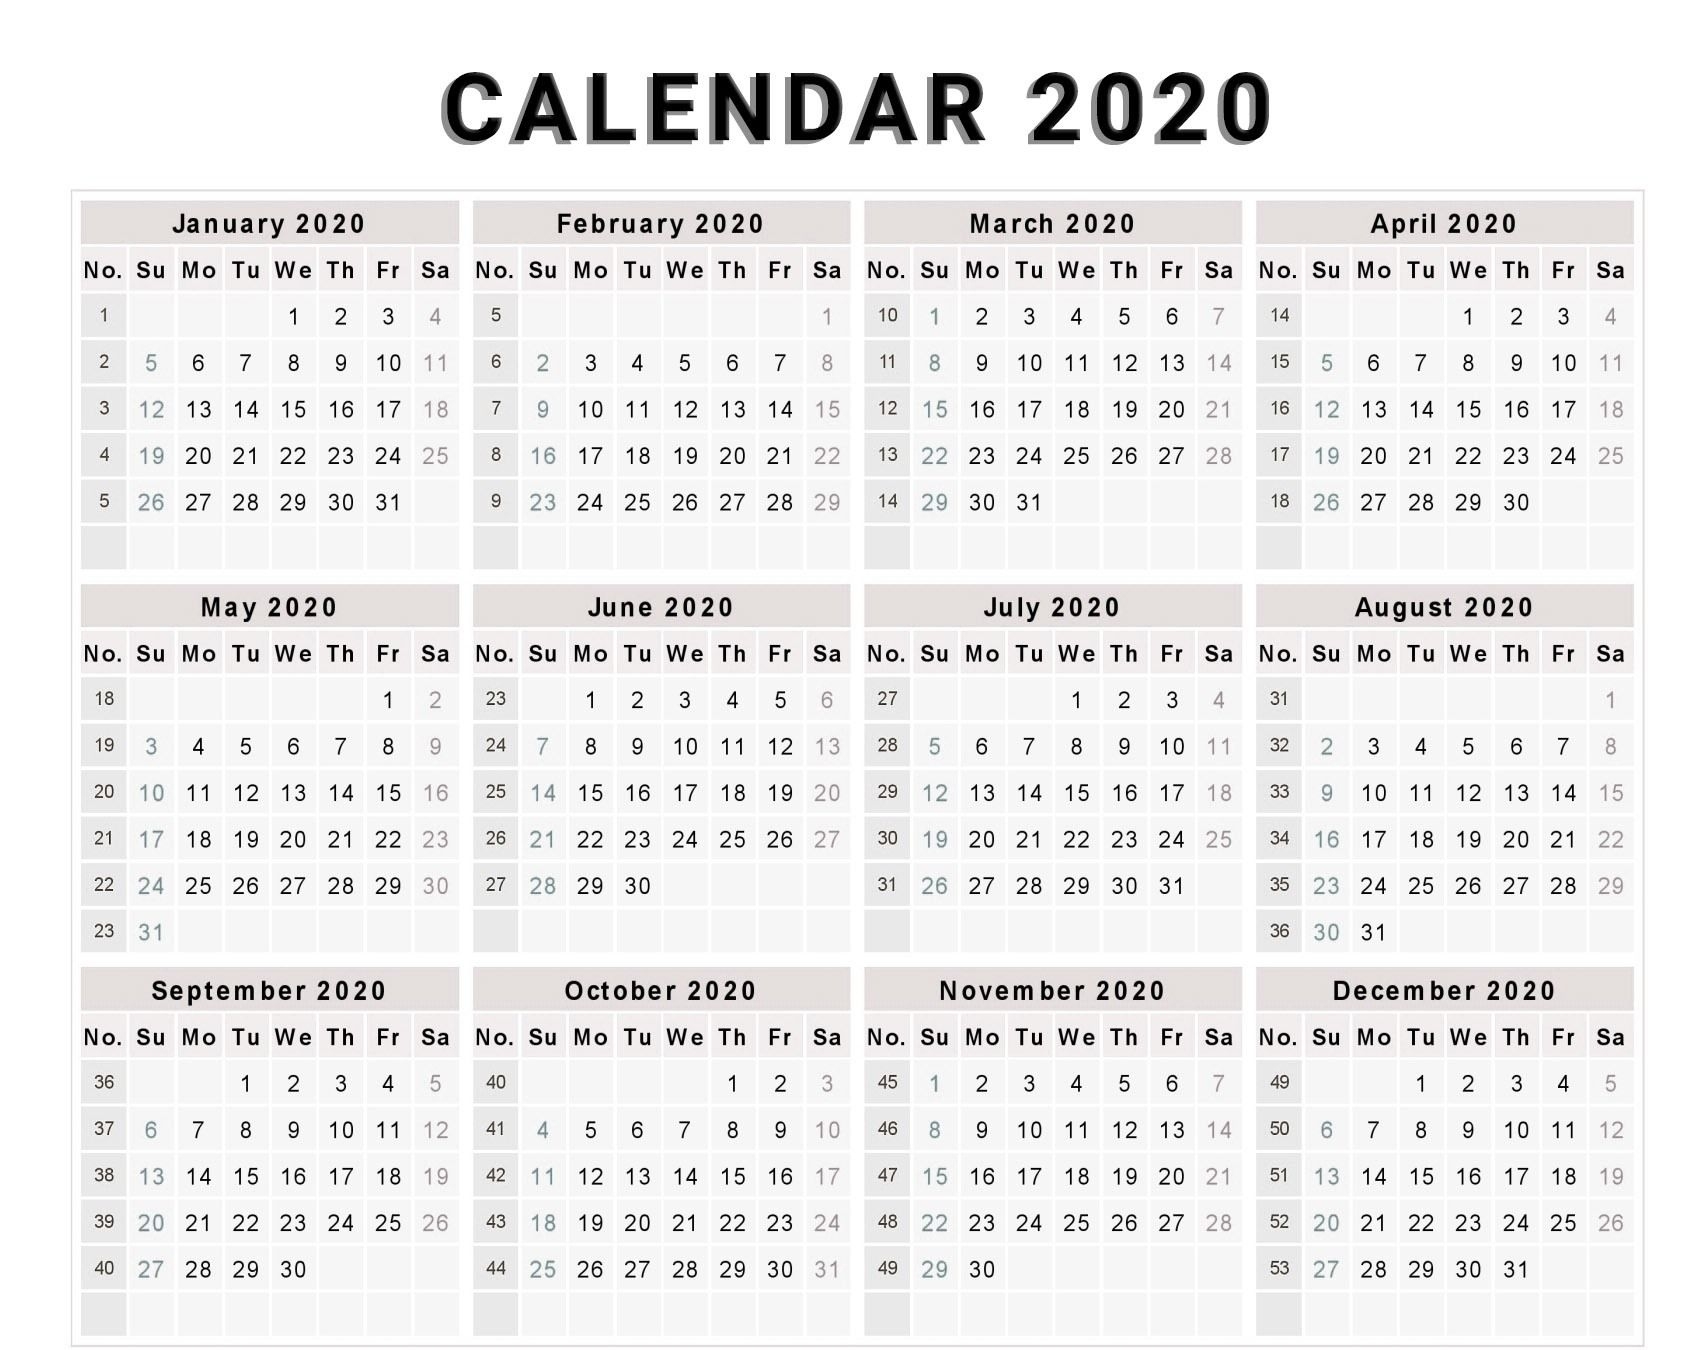 2020 Calendar Printable With Numbered Days | Monthly Remarkable Calendar With Days Numbered 2020